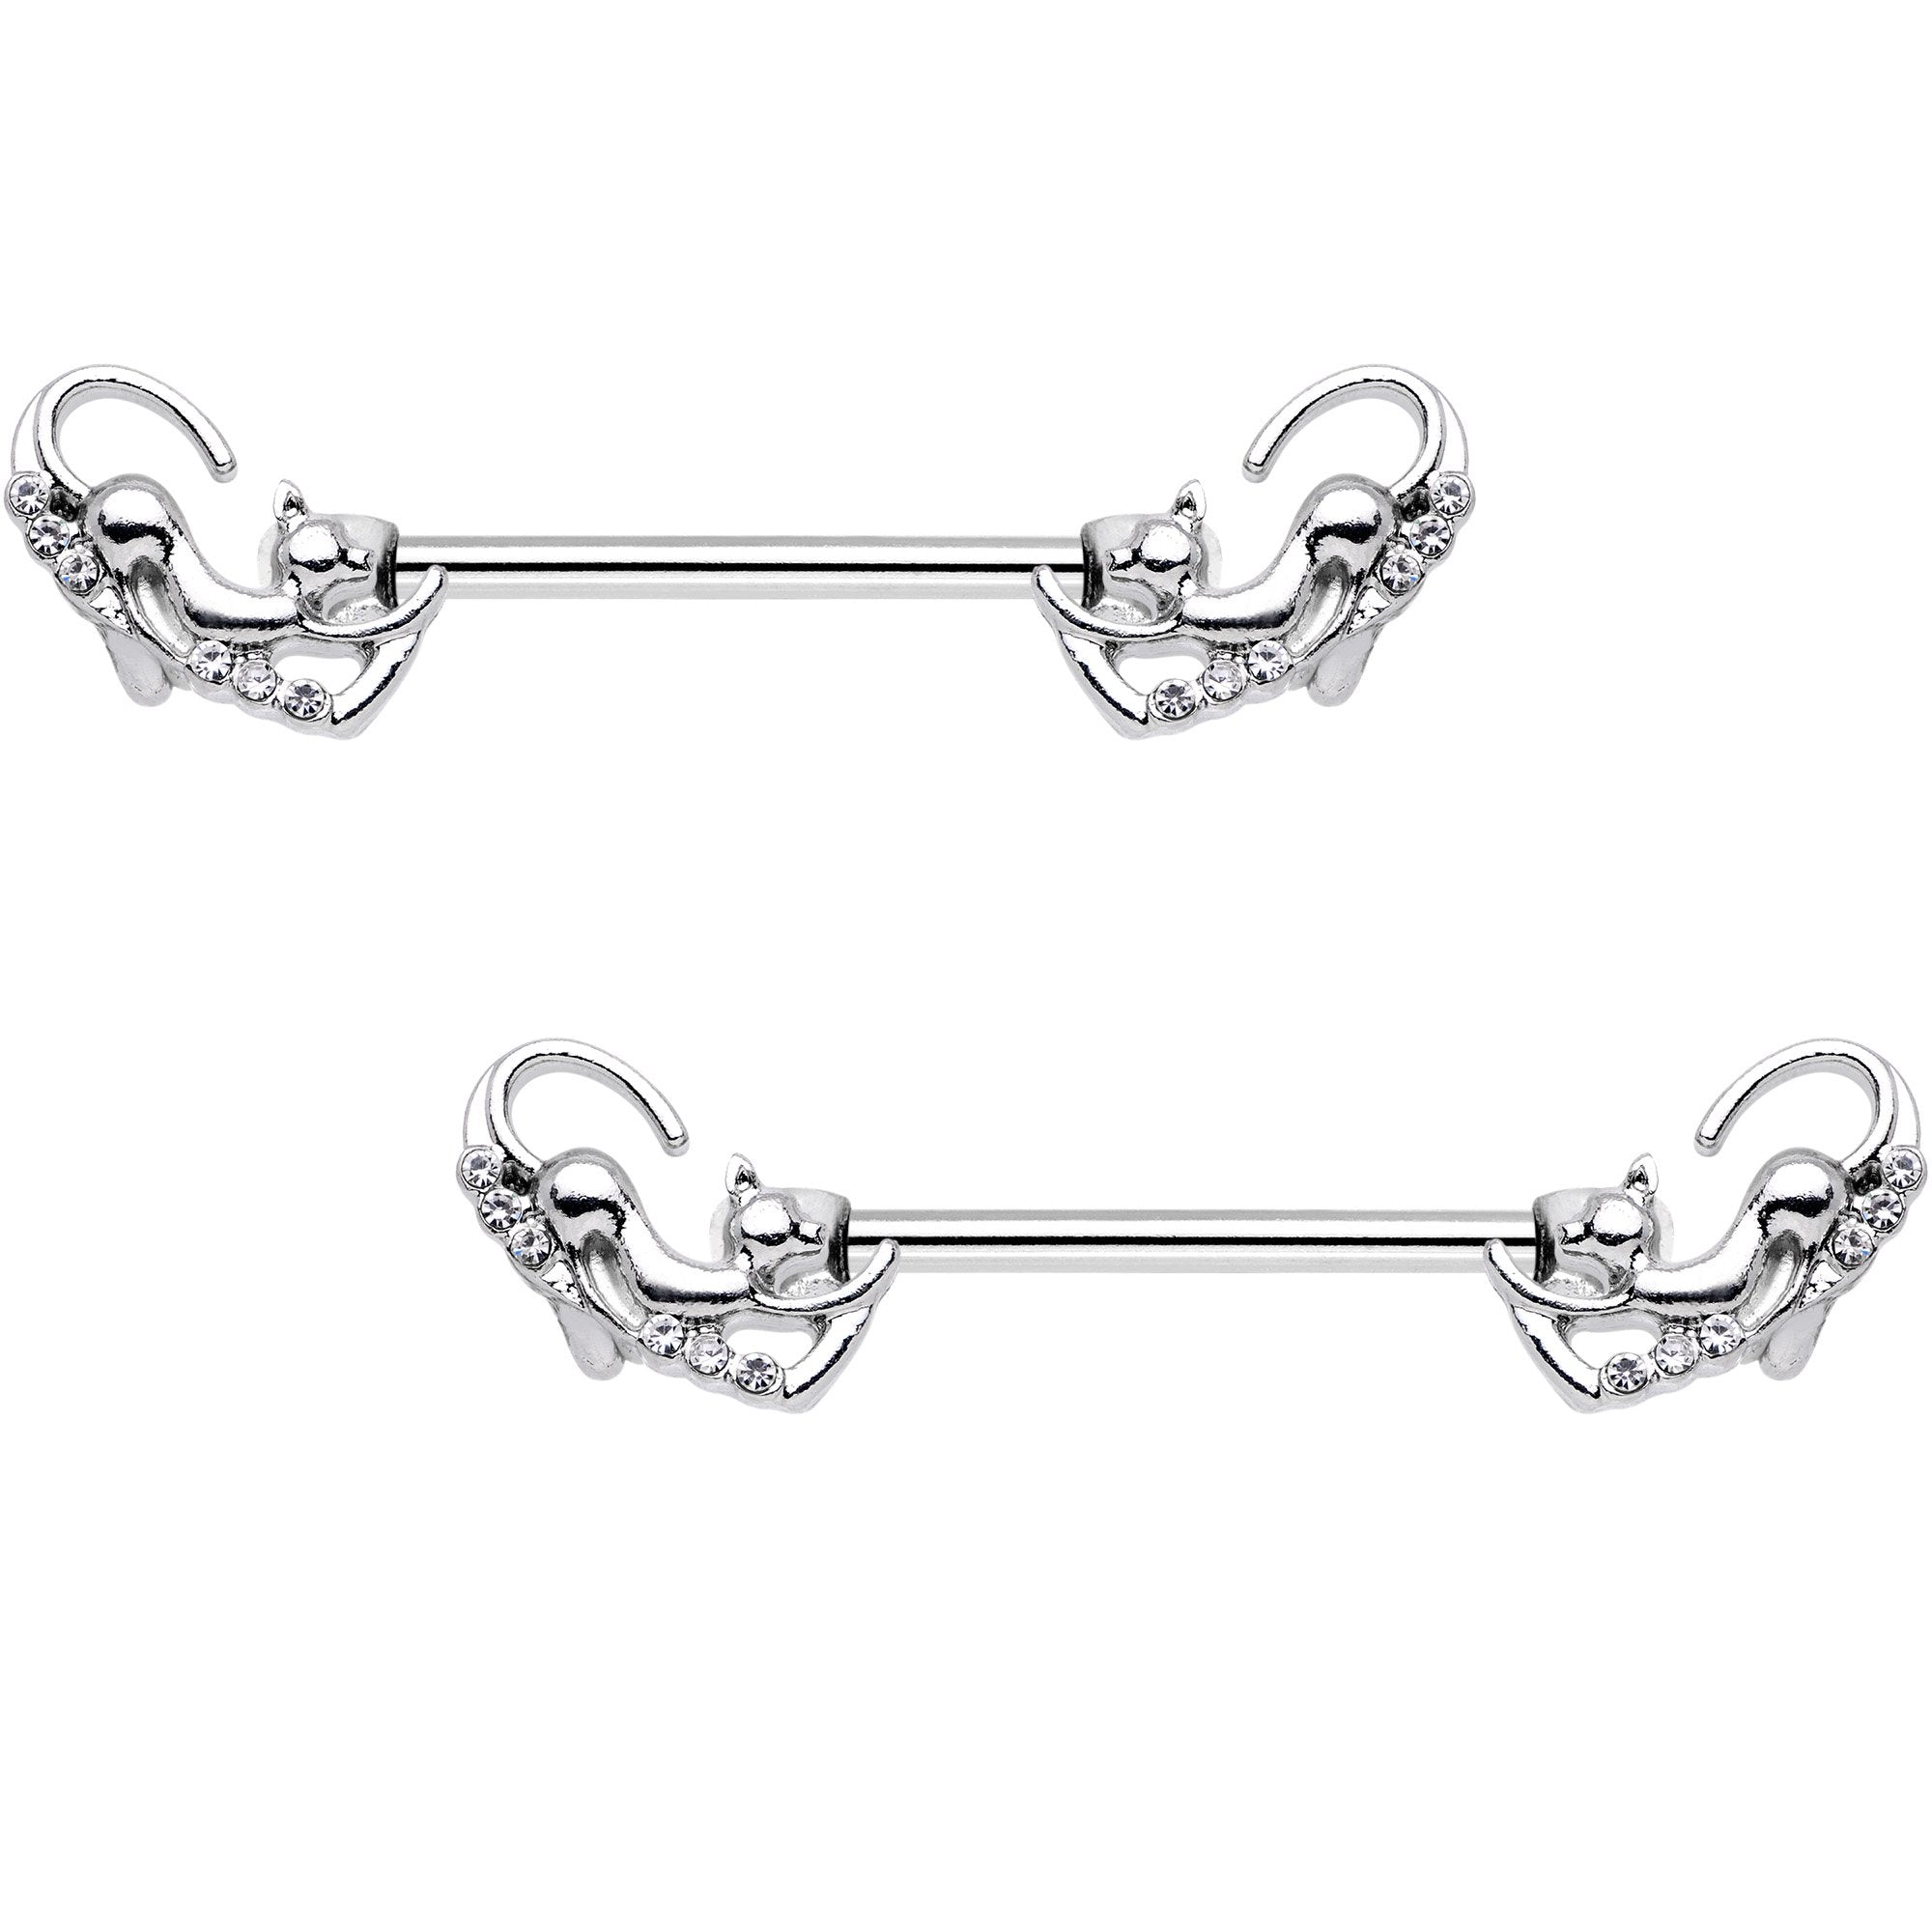 9/16 Clear Gem Cats Meow Barbell Nipple Ring Set